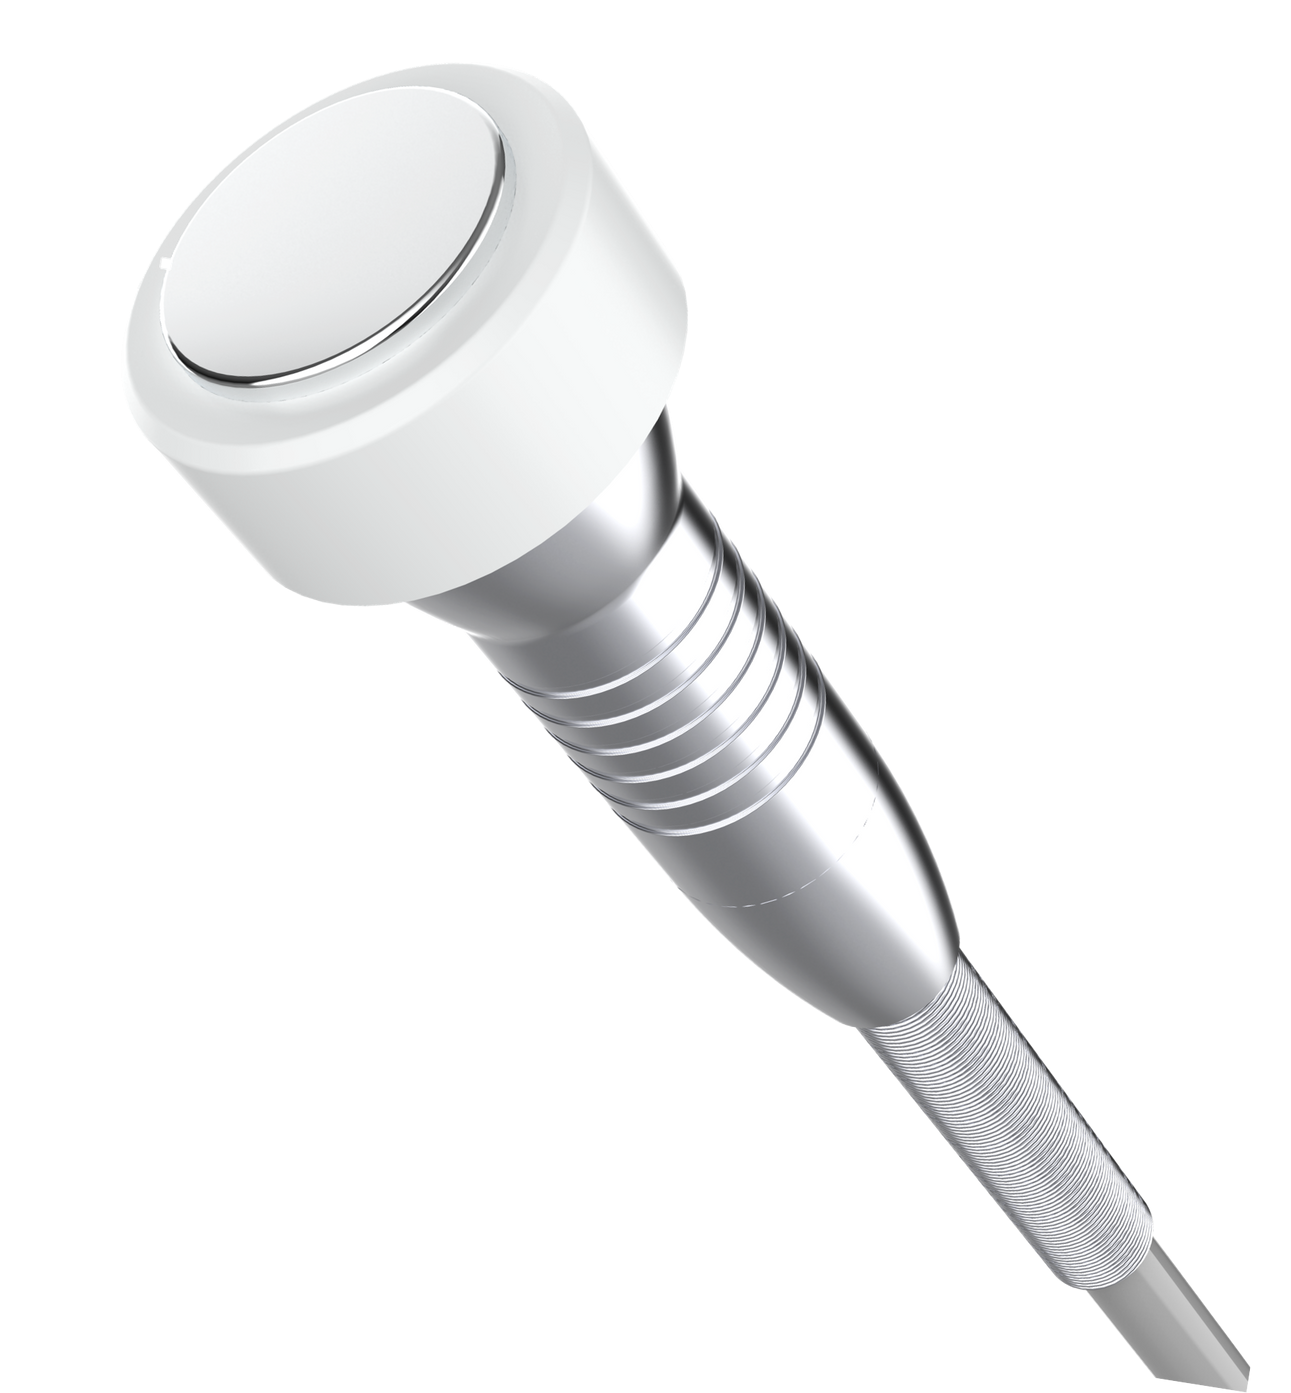 A close up of a microphone on a white background